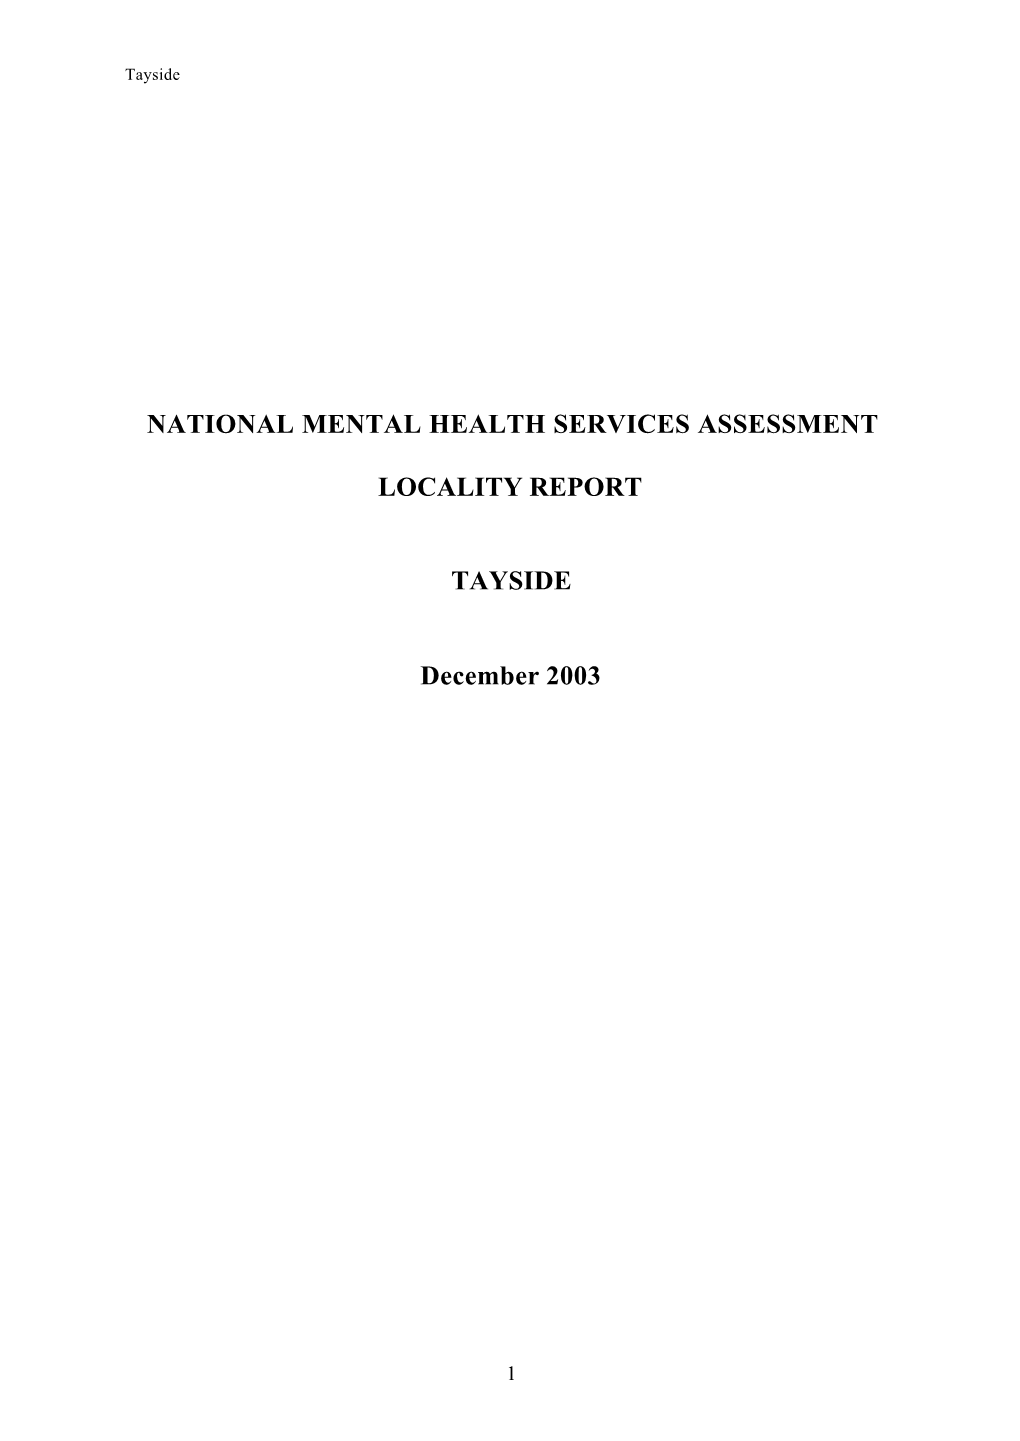 NATIONAL MENTAL HEALTH SERVICES ASSESSMENT LOCALITY REPORT TAYSIDE December 2003